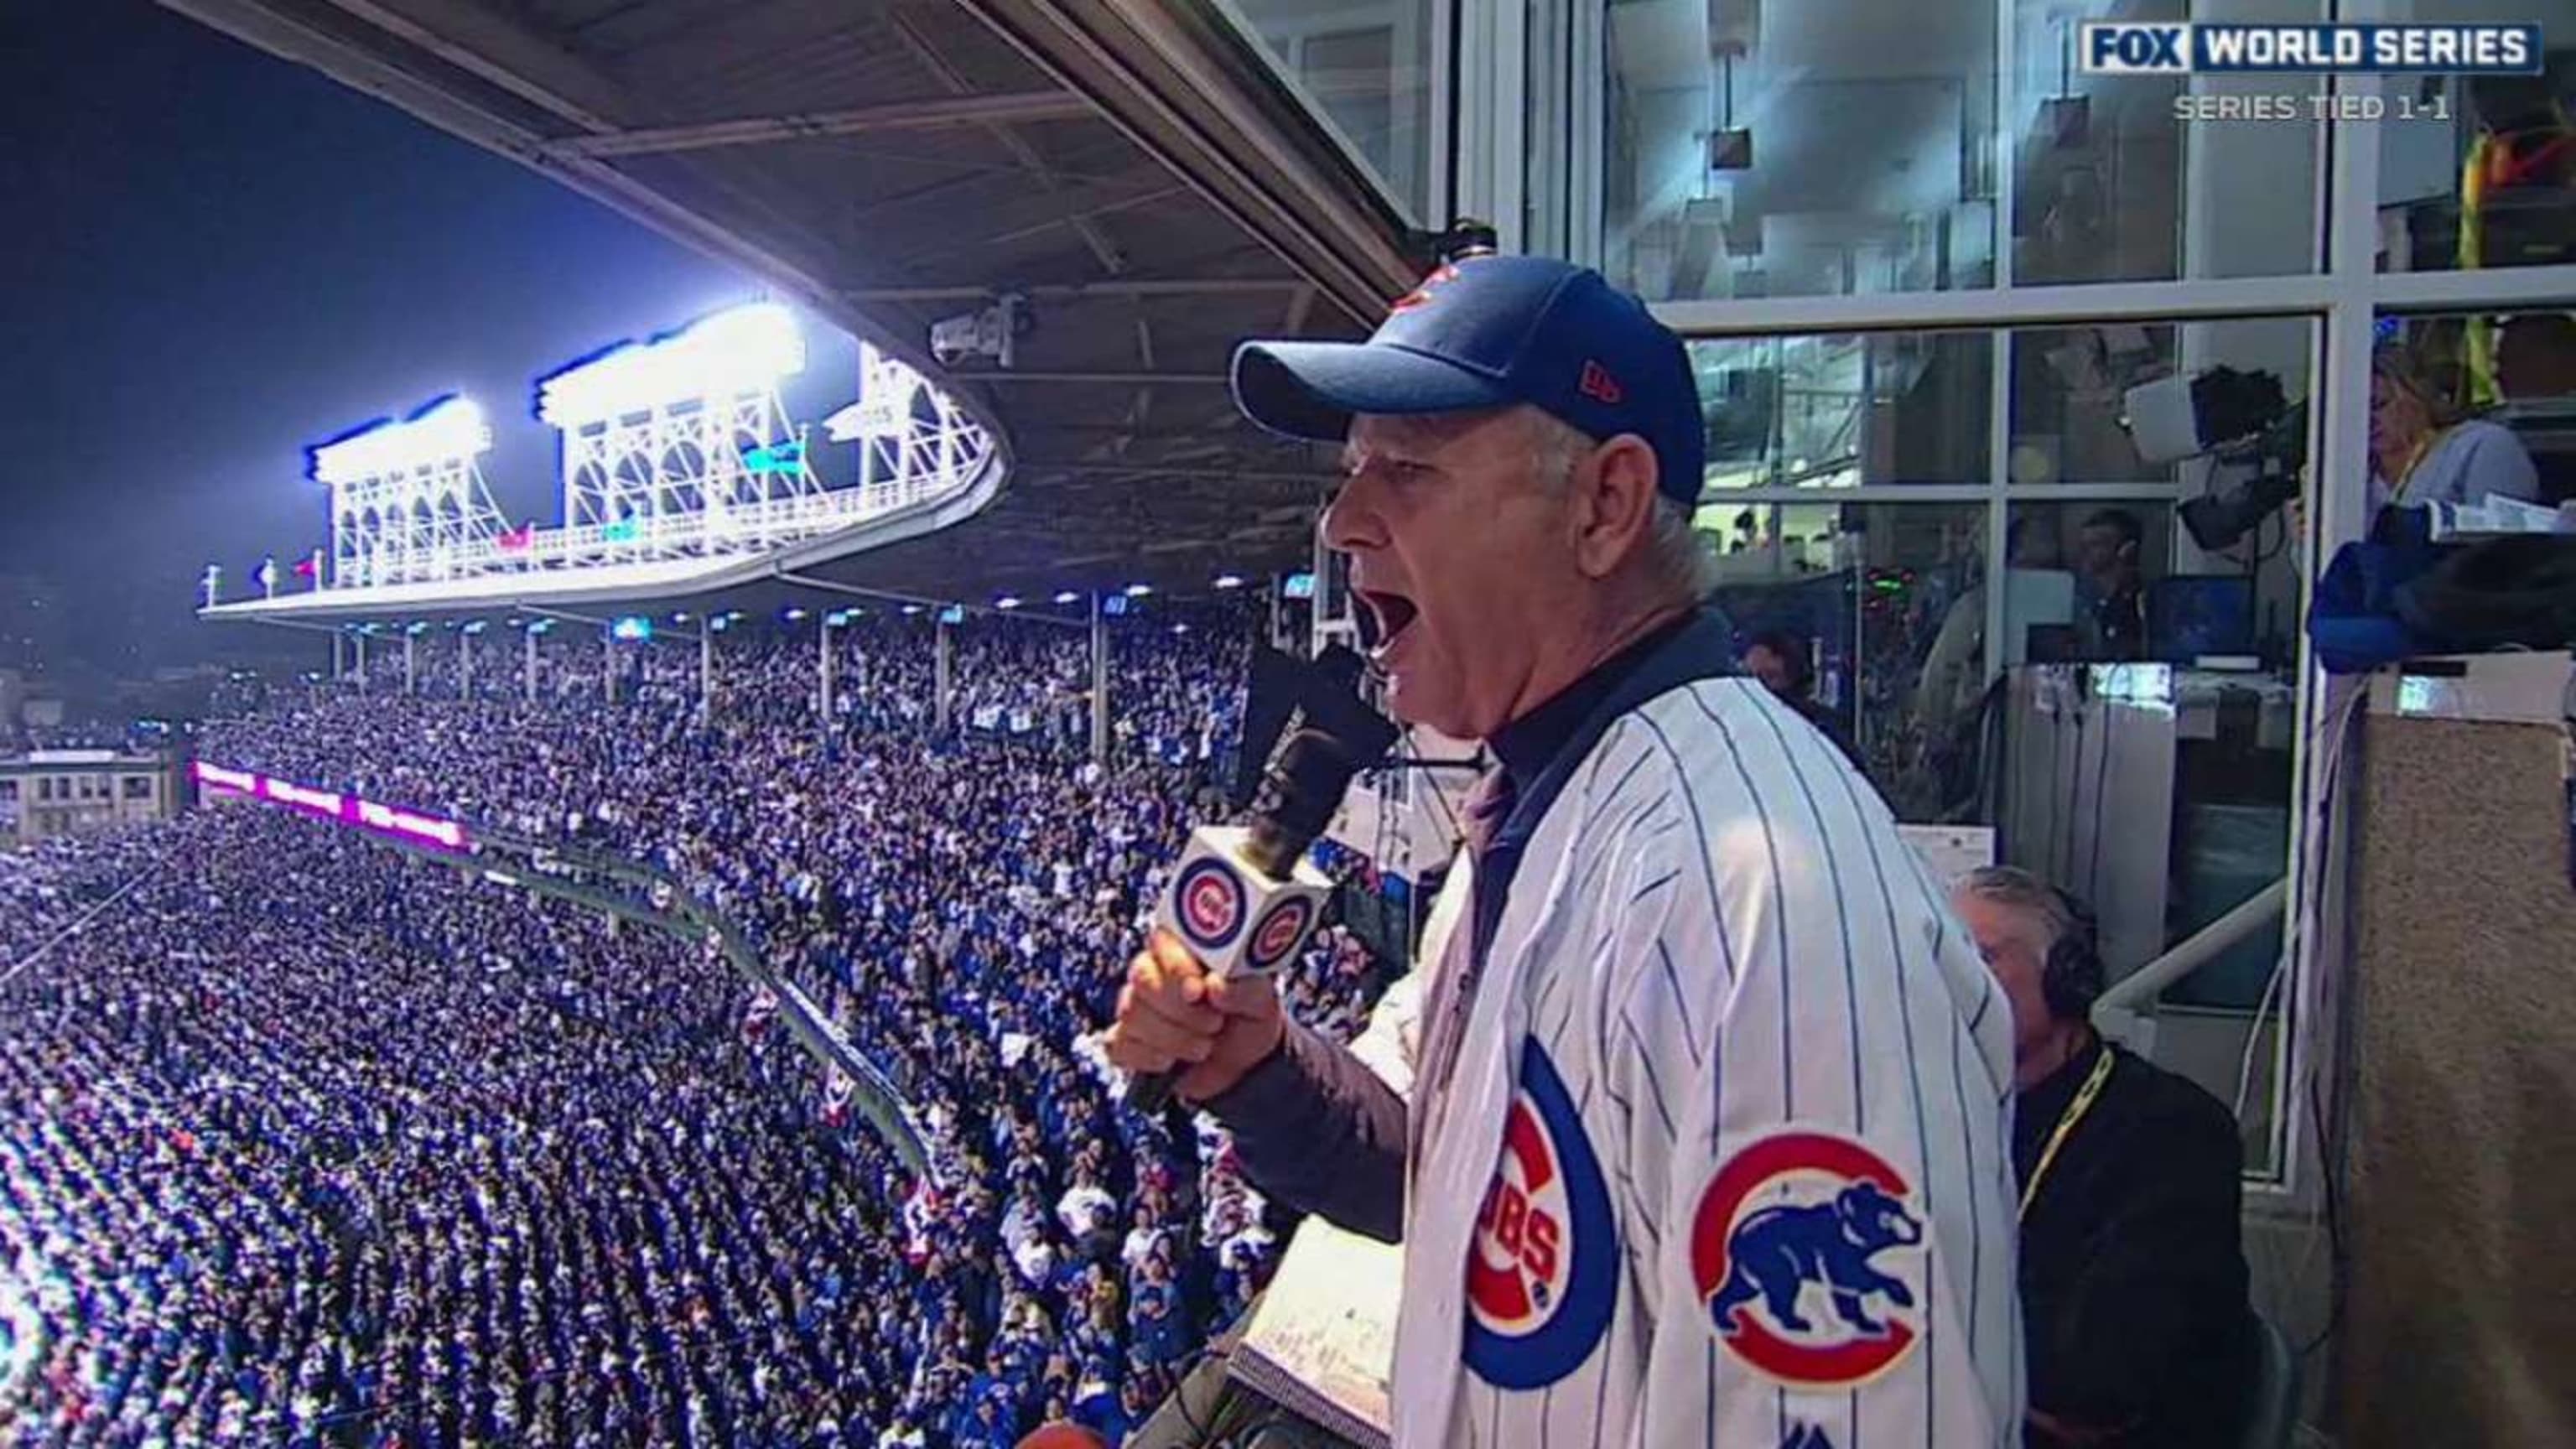 Harry Caray sing the 7th inning stretch at Wrigley Field on 7/3/15